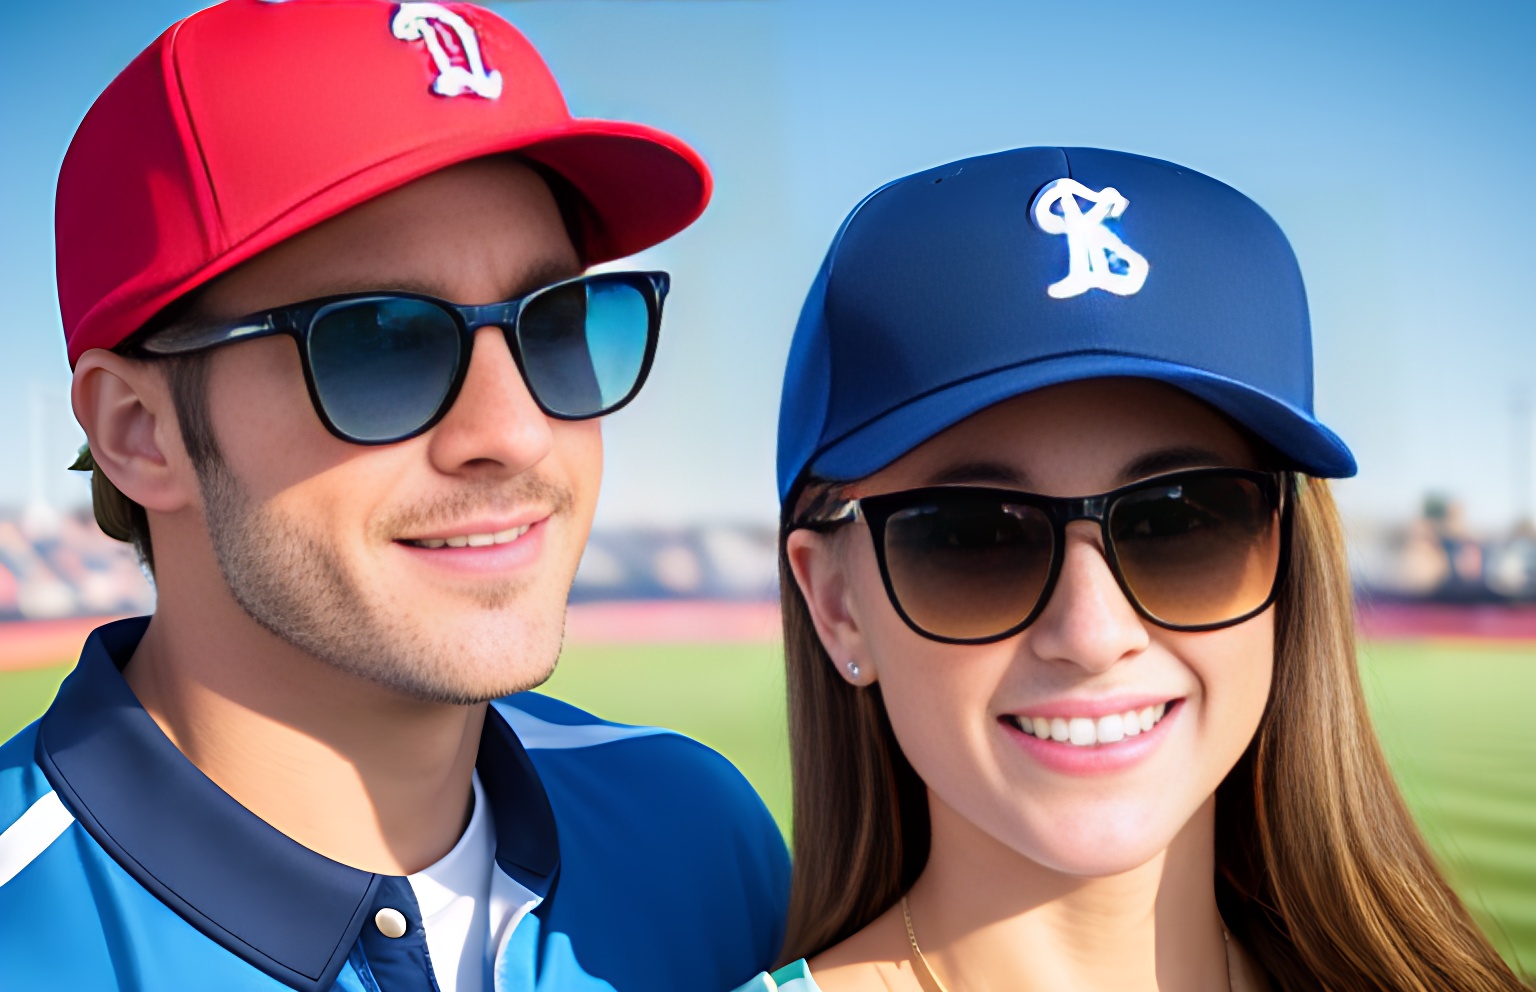 Can You Wear Sunglasses With a Baseball Hat?